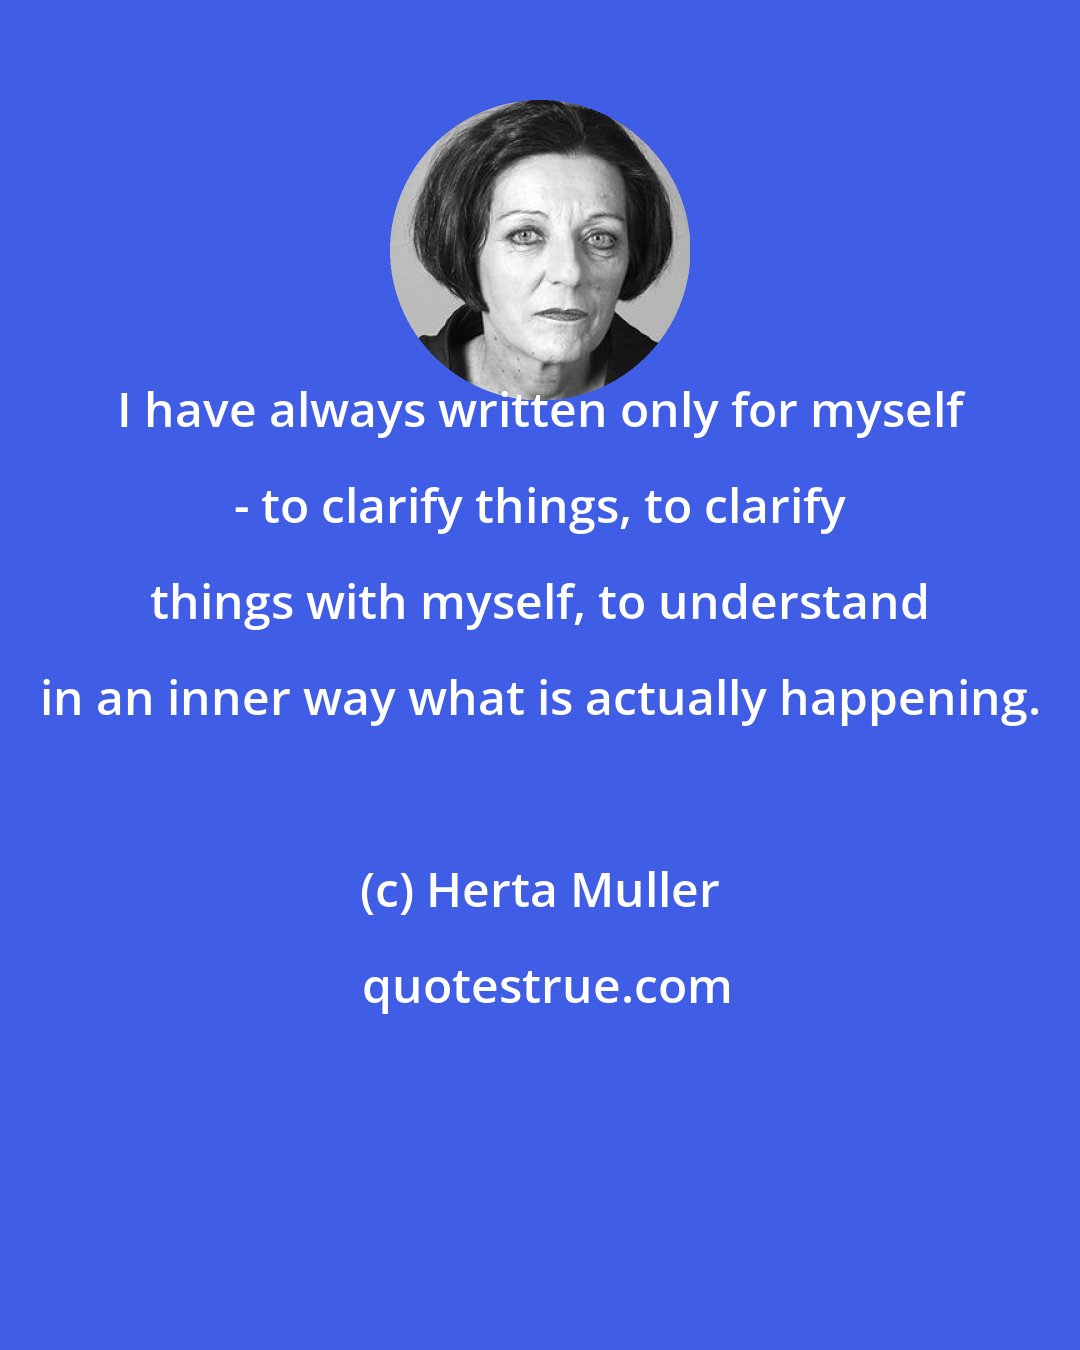 Herta Muller: I have always written only for myself - to clarify things, to clarify things with myself, to understand in an inner way what is actually happening.